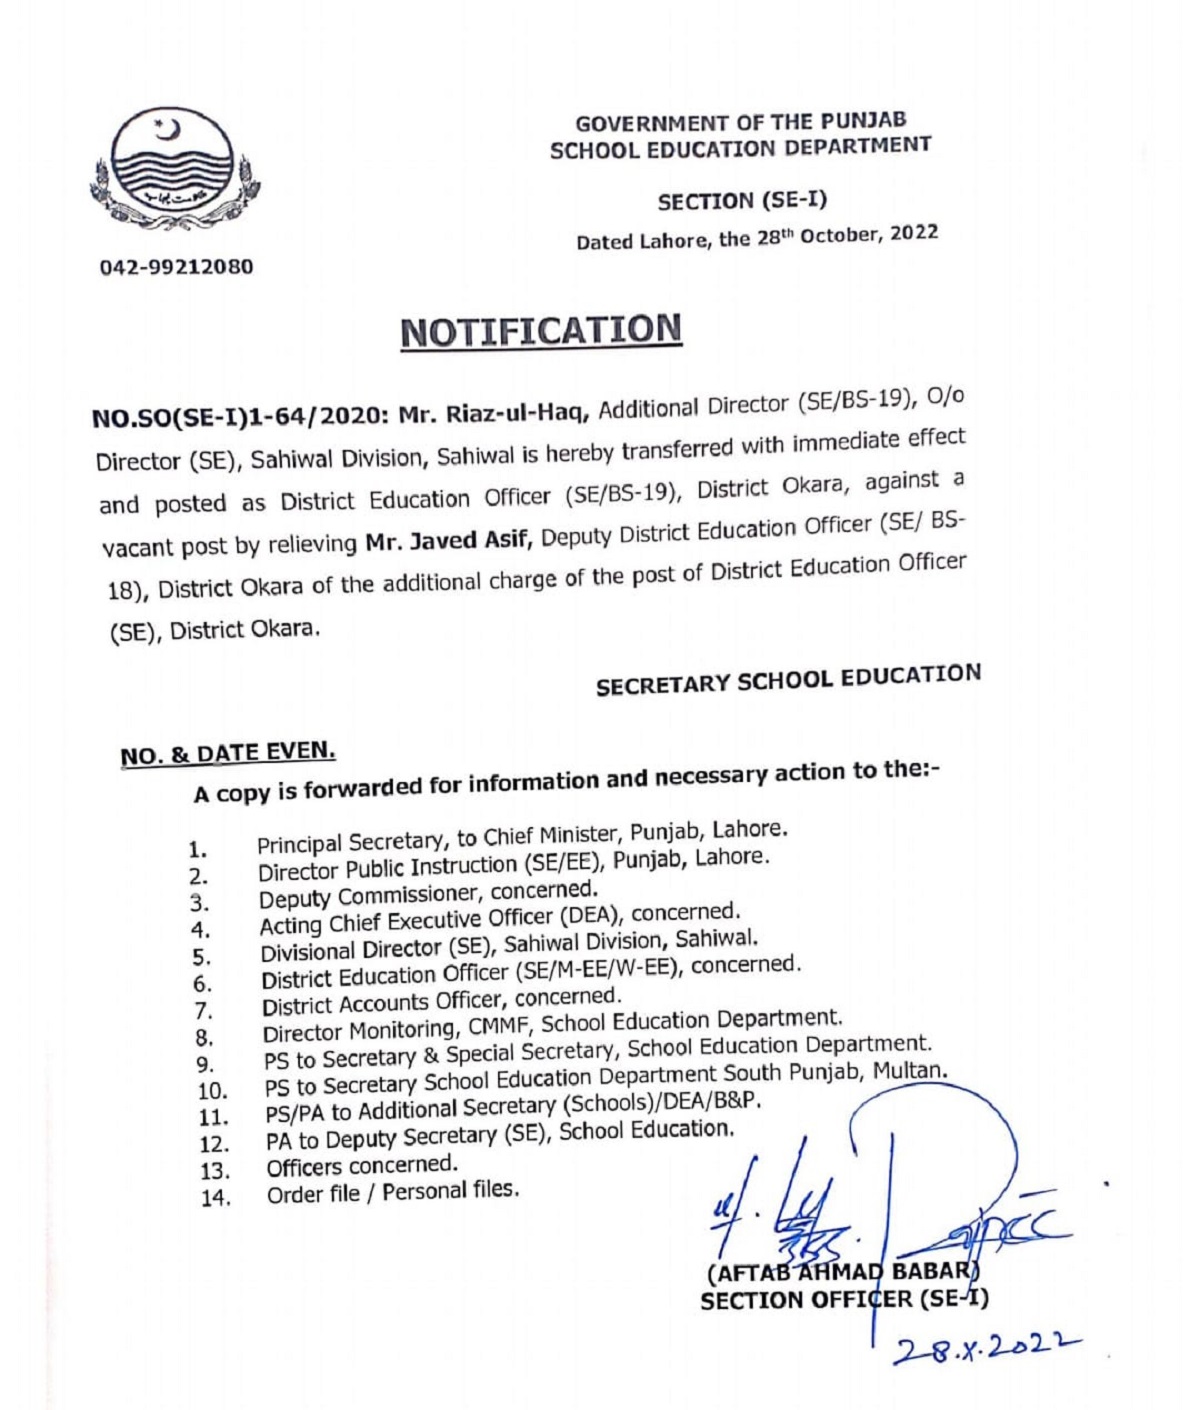 Mr. Riaz Ul Haq Posted as DEO SE Okara,District Education Officer SE,Additional Director Director SE Sahiwal,Mr. Javed Asif Dy. DEO SE,School Education,